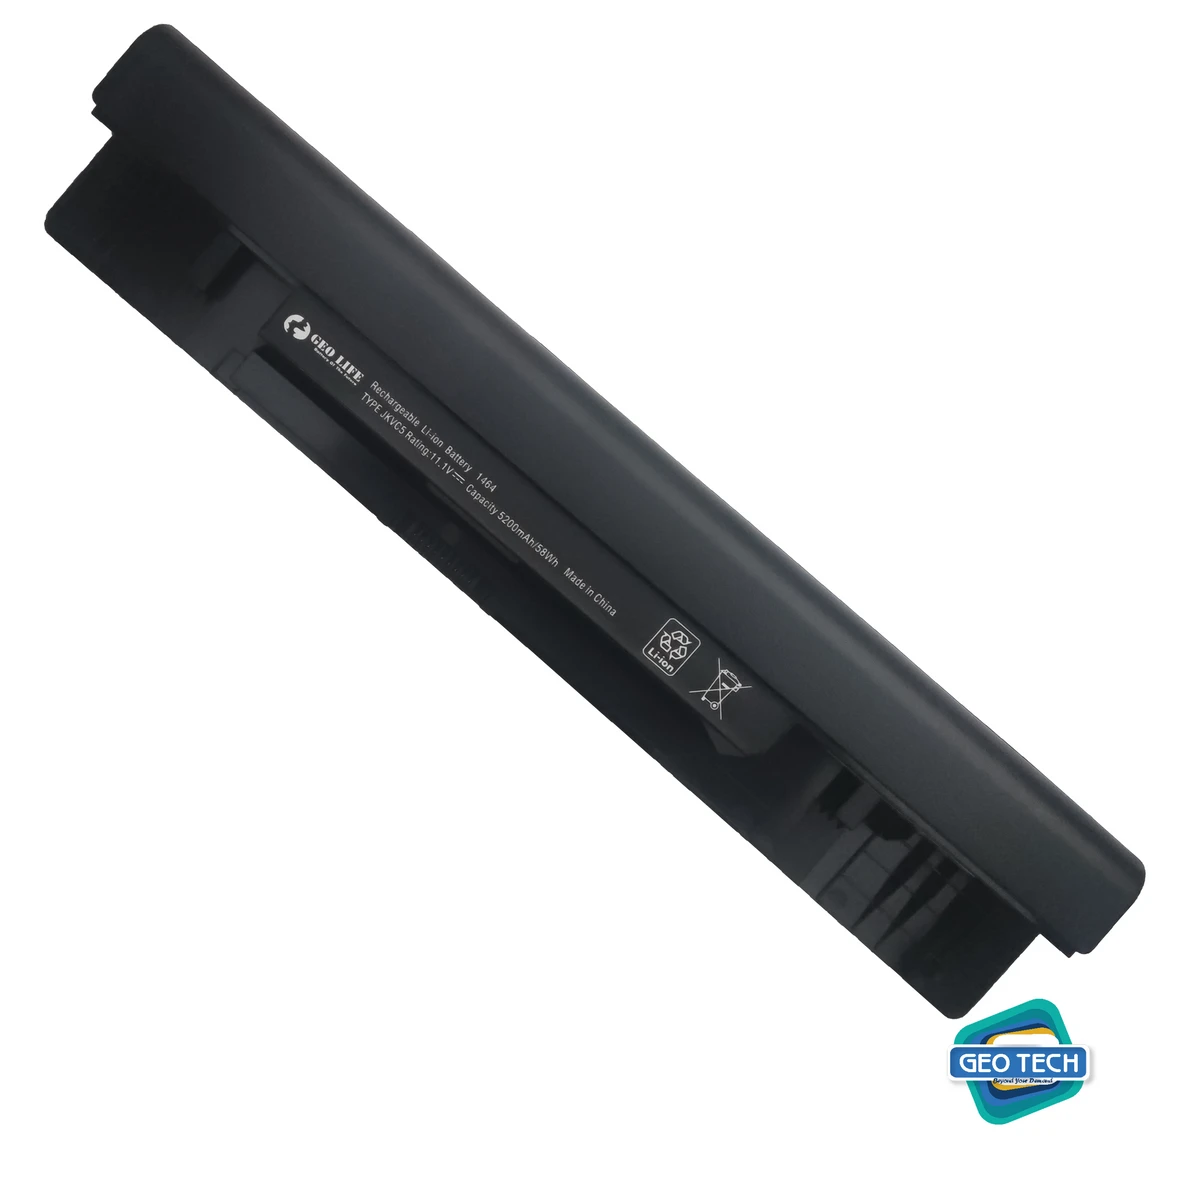 Laptop Battery Compatible for Dell Inspiron 1464 1464D 1464R 1564 1564D 1564R I1564 I1464 1764 14, fits NKDWV 0X0WDM UM6 X0WDM 0FH4HR 312-1021 5YRYV 9JJGJ FH4HR JKVC5 K456N NKDWV P07E P08F P09G P09G001 TRJDK UM3 UM5 OEM GEO LIFE BRAND